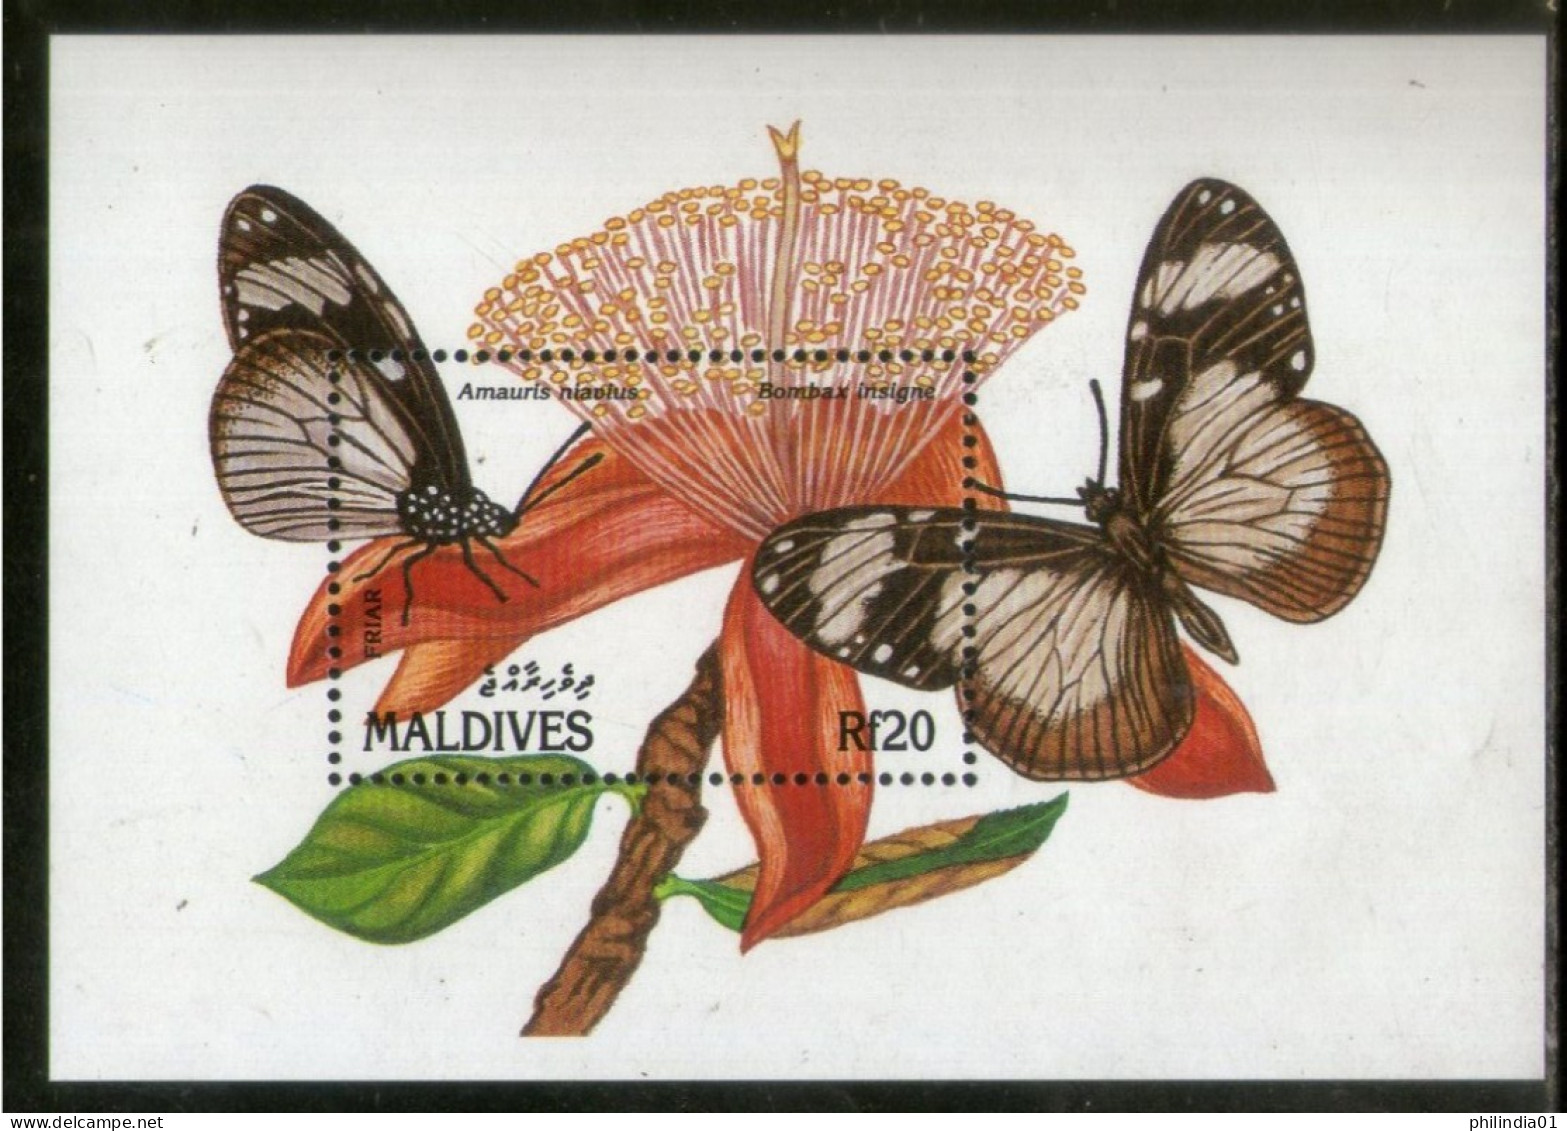 Maldives 1991 Friar Butterflies & Flowers Moth Insect Sc 1572 M/s MNH # 12756 - Vlinders